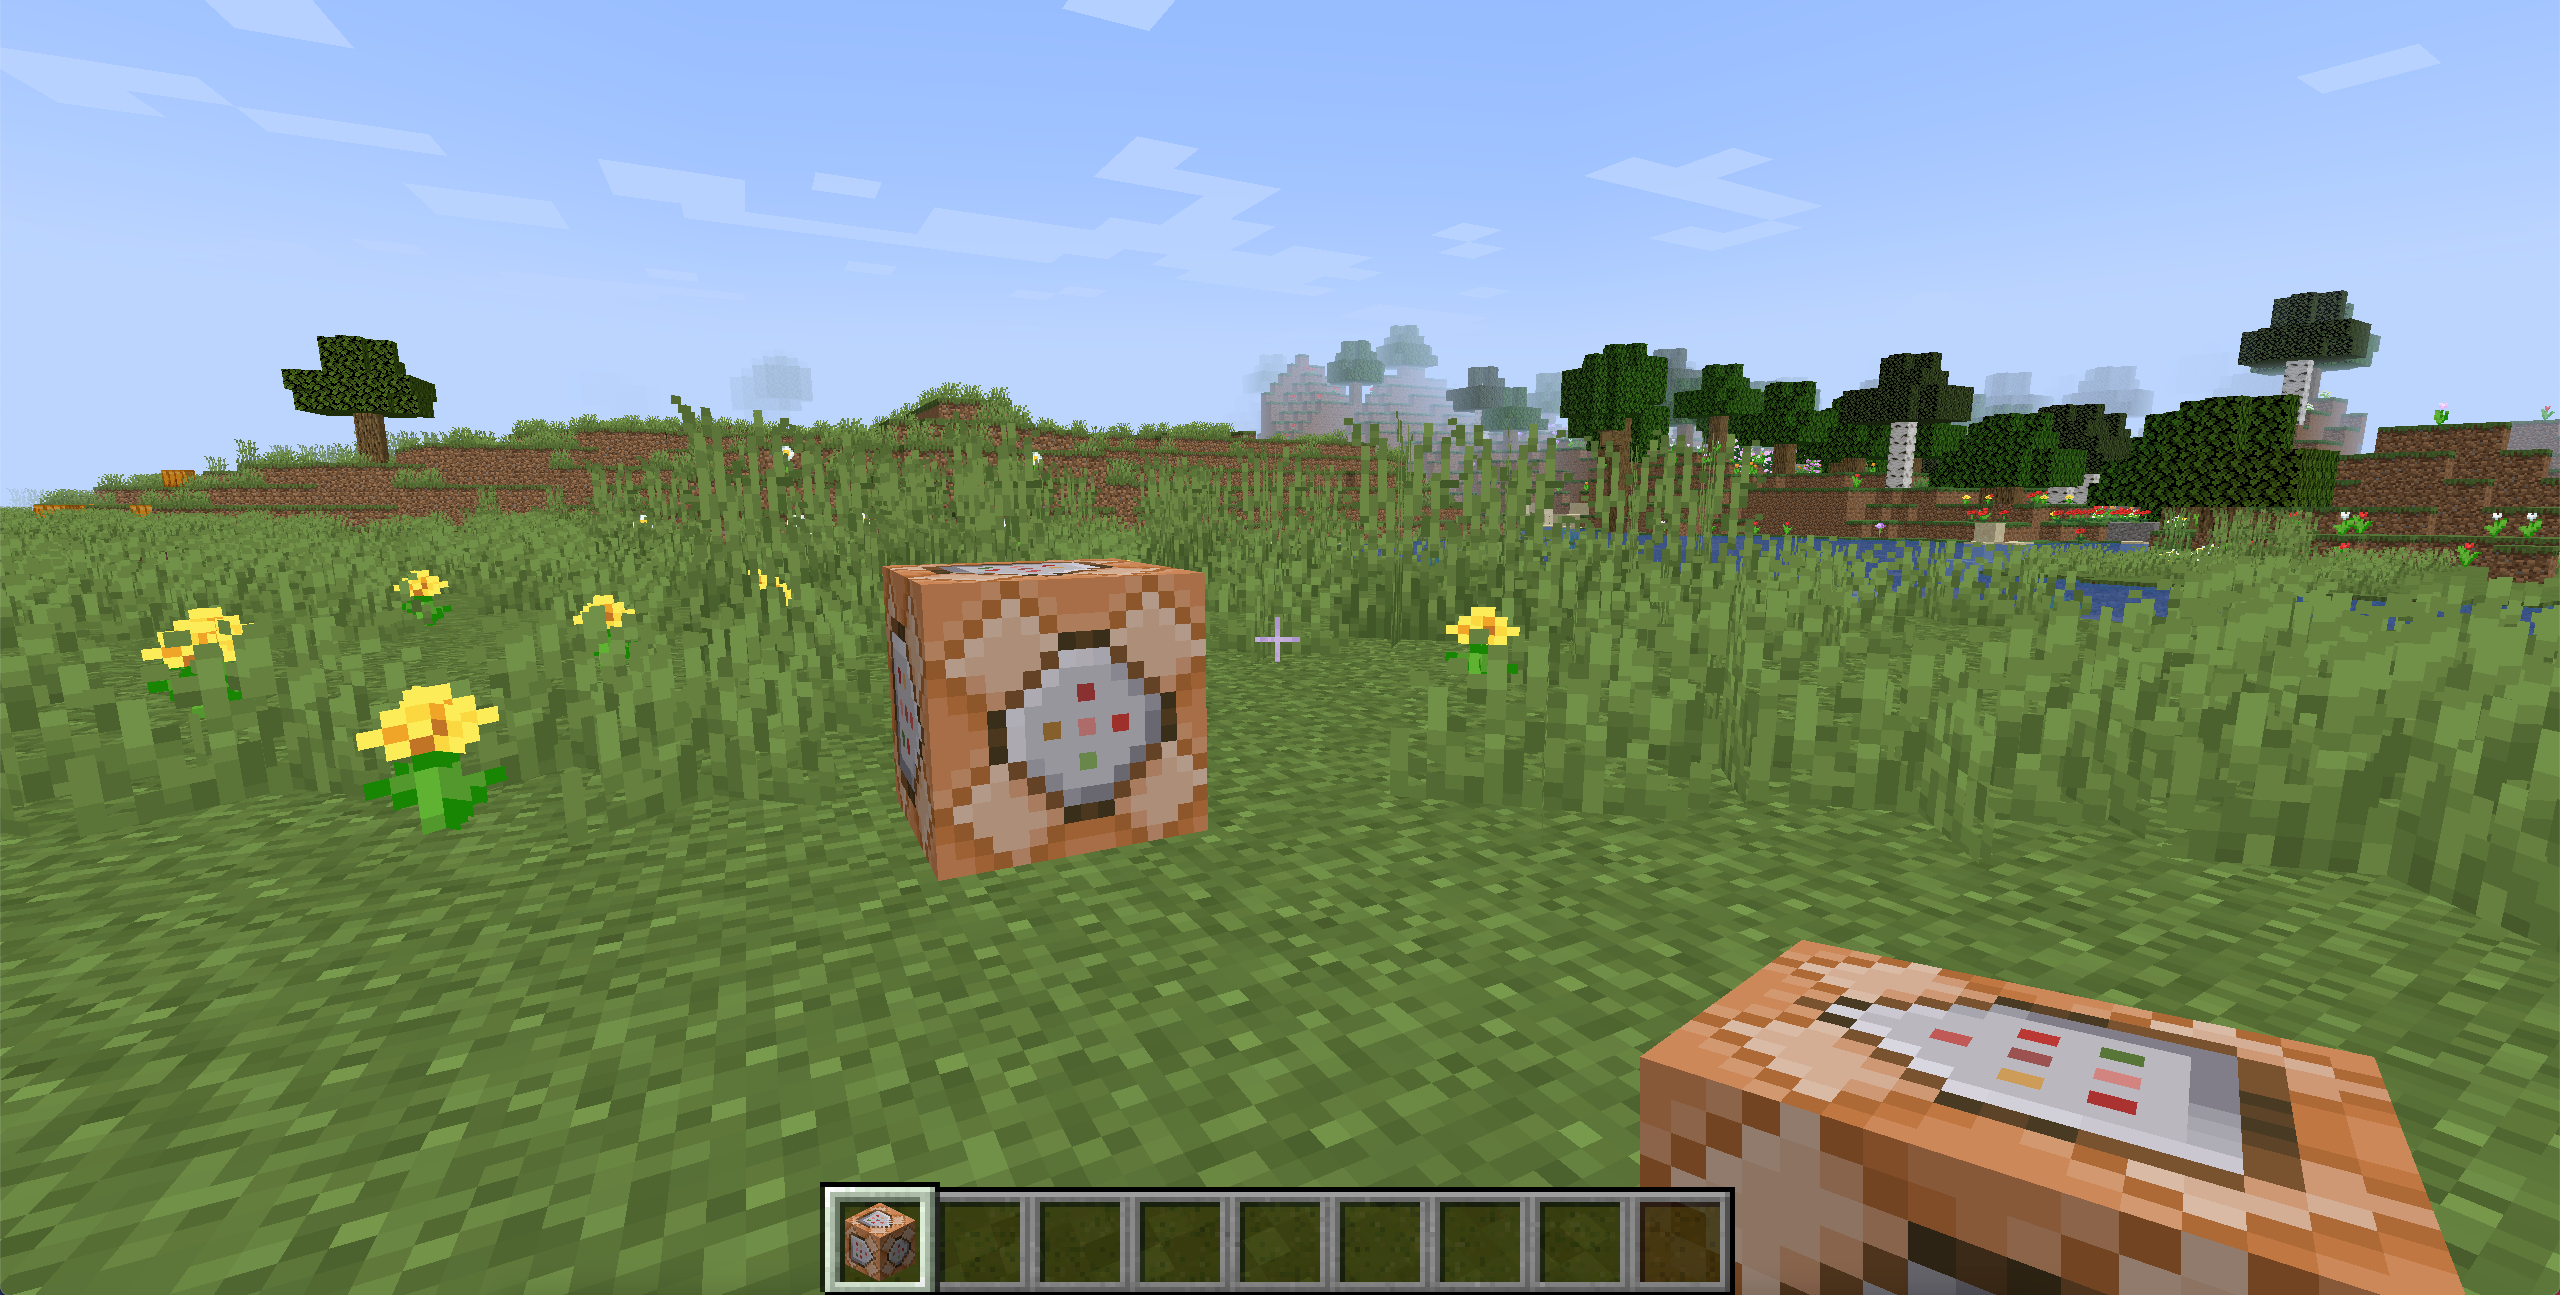 A command block in Minecraft.